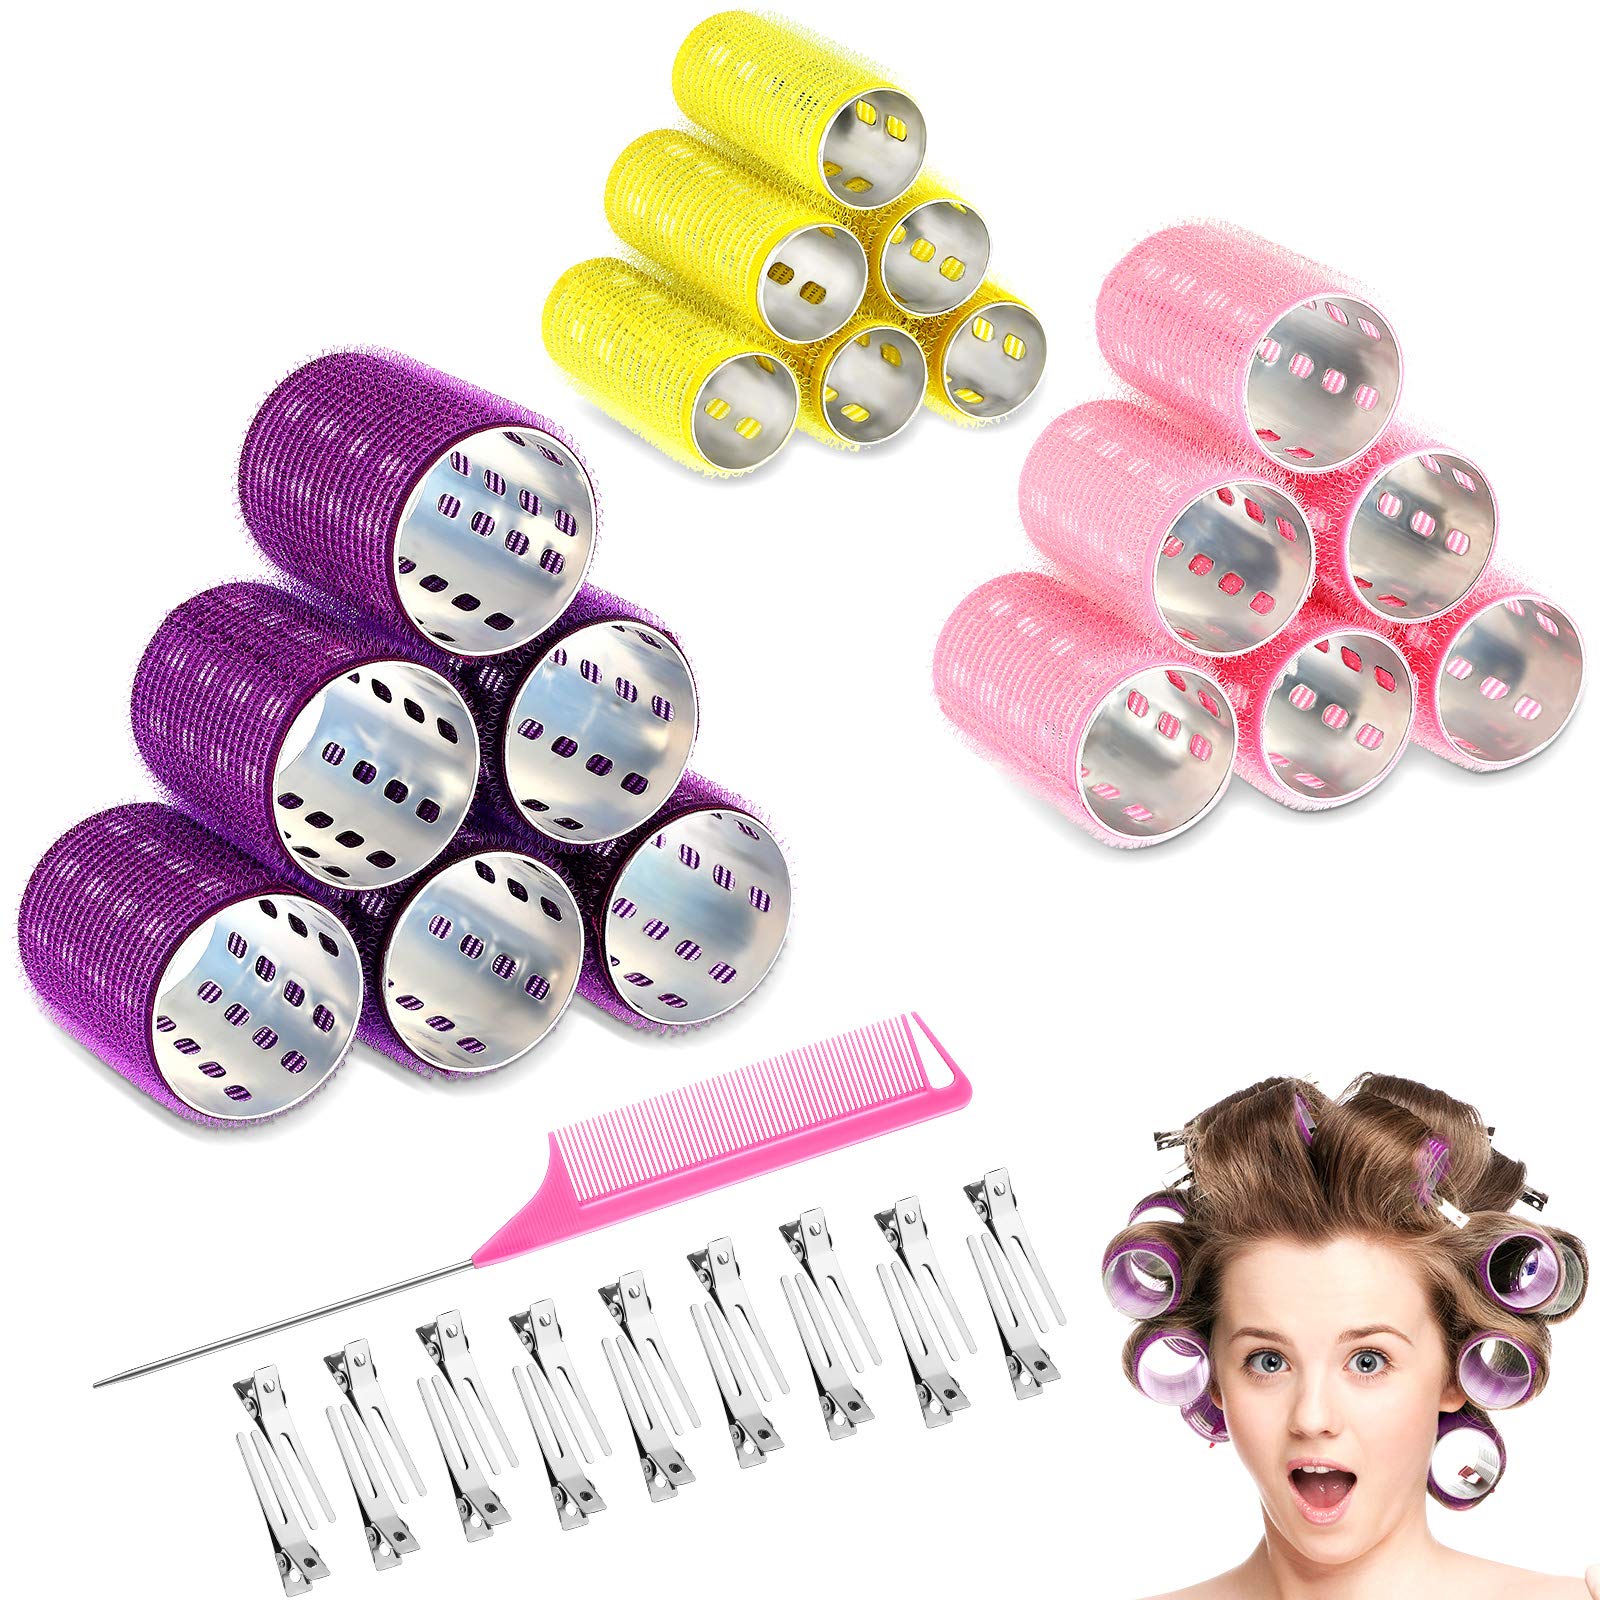 37 Pieces Aluminium Thermal Hair Rollers Set 3 Sizes Self Grip Hair Rollers  18 Pieces Duckbill Hair Clips, Comb Hairdressing Styling Tool, Random Color  for Women, Men ( Inch,  Inch,  Inch) 37 Piece Set